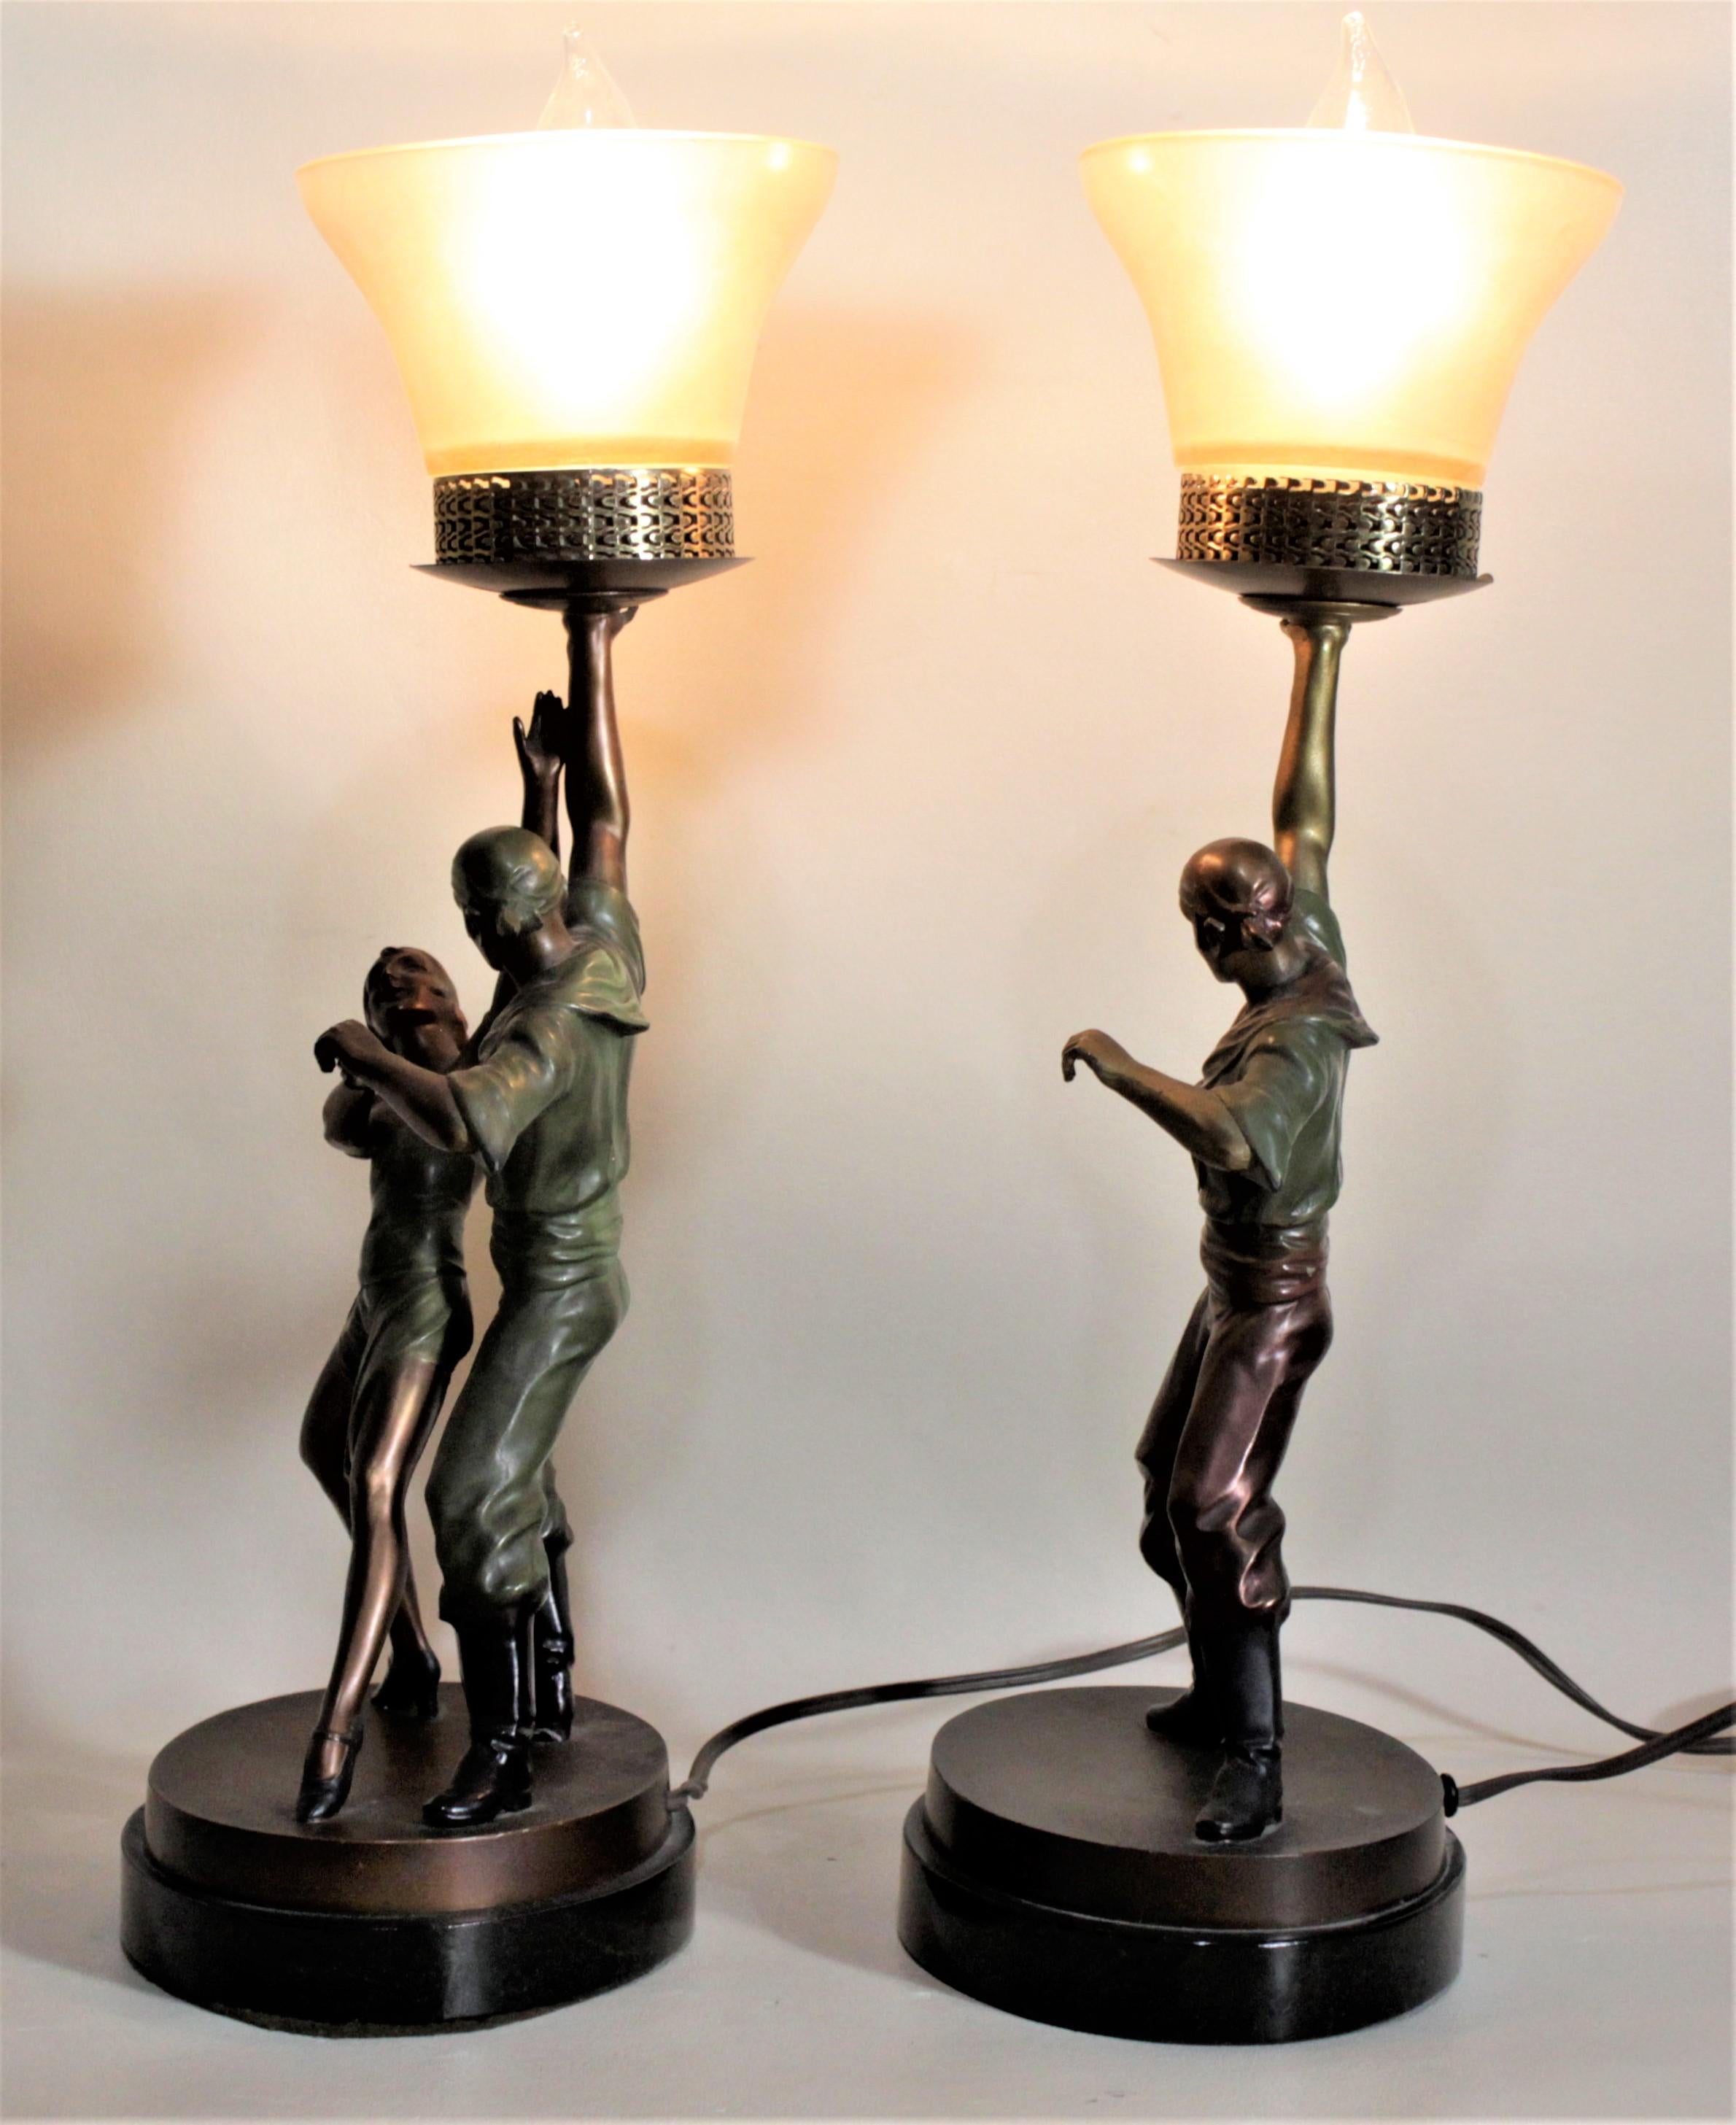 Pair of Art Deco Cast and Cold-Painted Figural Theatrical Pirate Table Lamps In Good Condition For Sale In Hamilton, Ontario